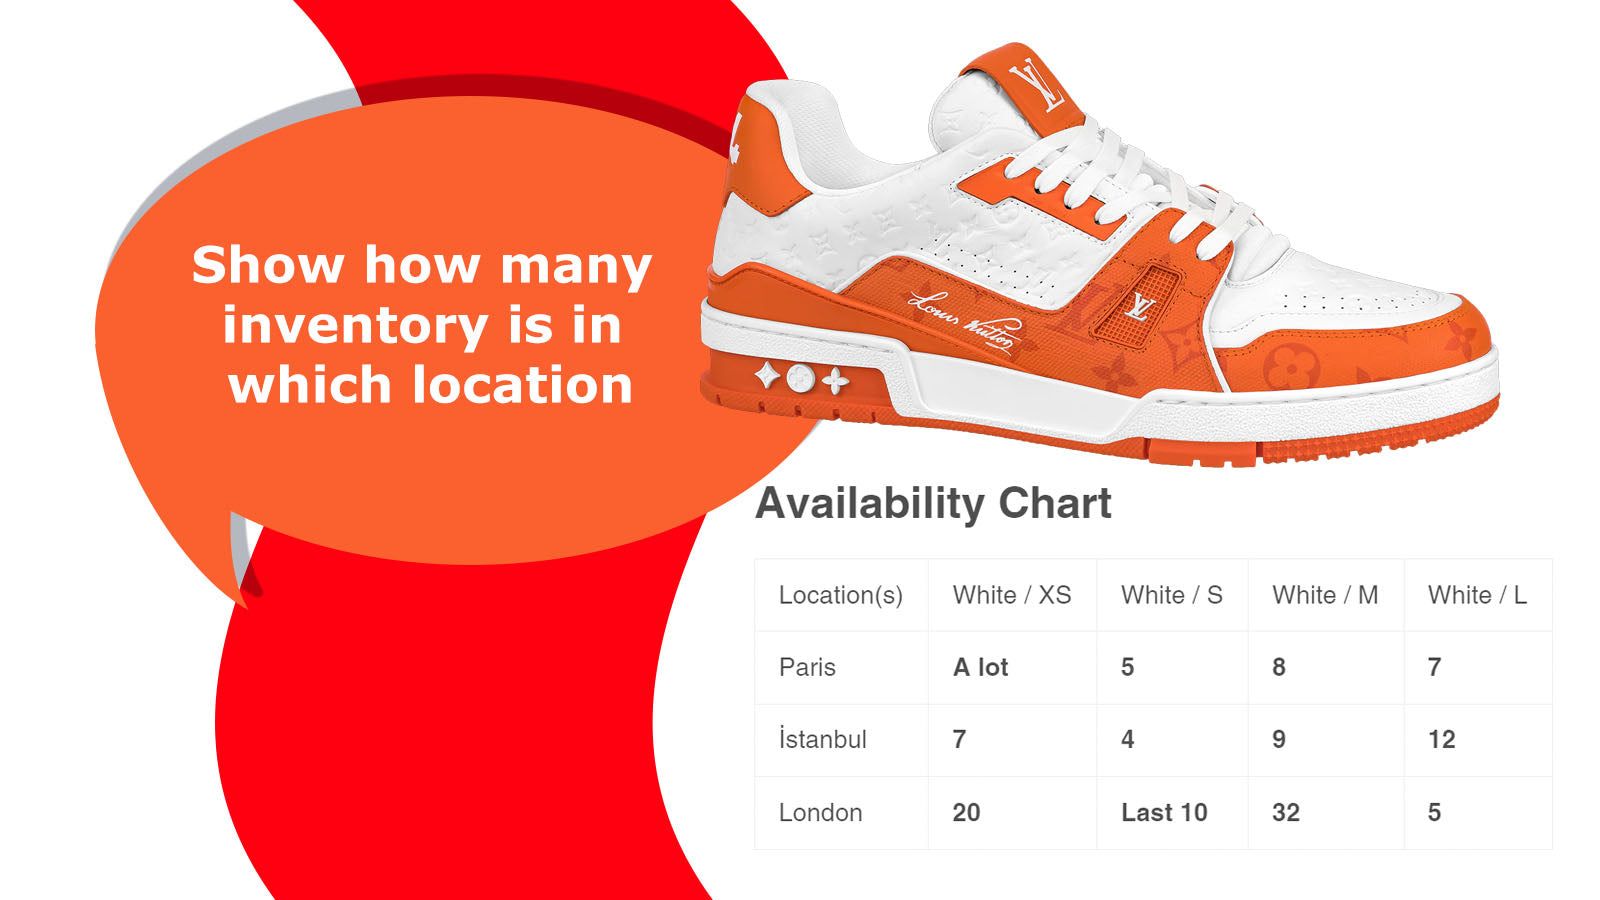 Show how many inventory is in which location